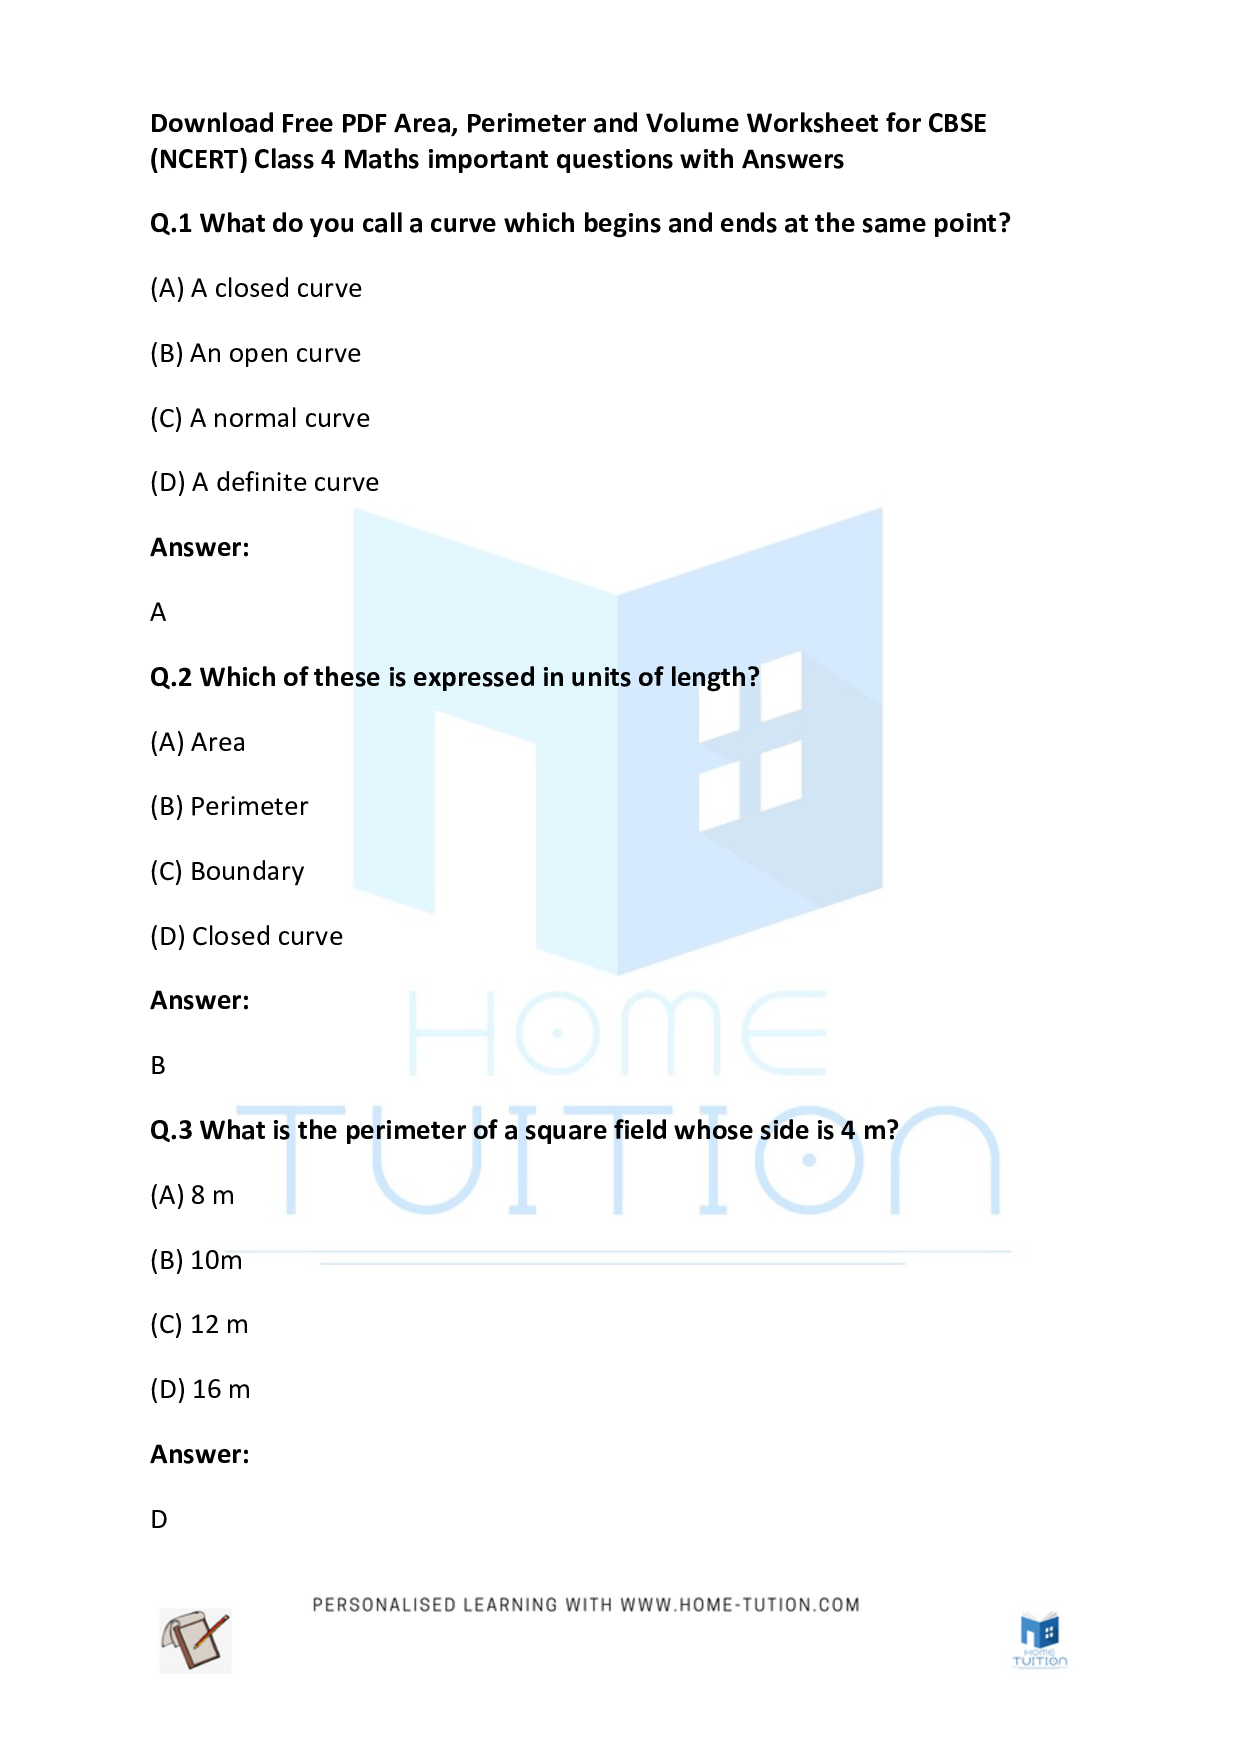 CBSE (NCERT) Class 4 Maths Area Perimeter and Volume Worksheet Questions with Answers 